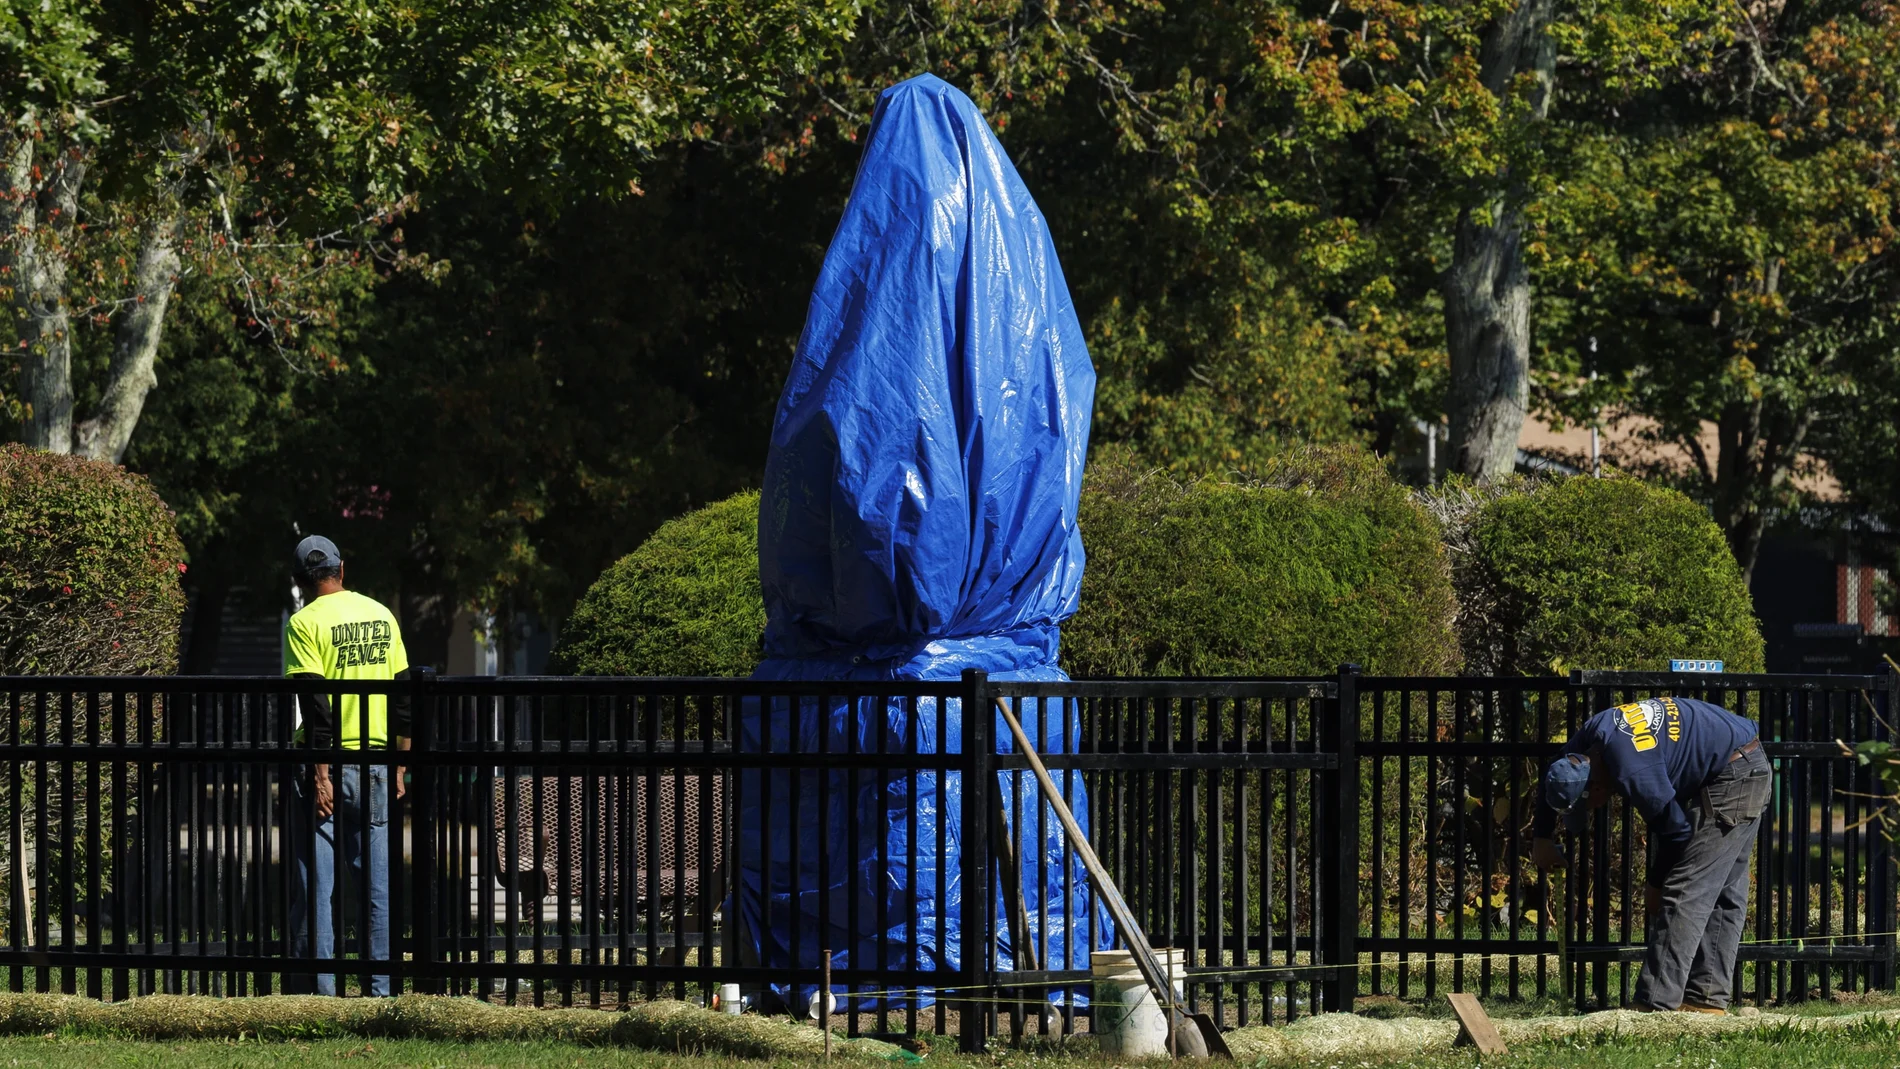 Johnston (United States), 04/10/2023.- The Christopher Columbus statue remains wrapped in a tarp as workers construct a surrounding fence on the small island in Pocassett Pond at Johnston Memorial Park in Johnston, Rhode Island, USA, 04 October 2023. The statue, set to be unveiled on 09 October 2023, the Columbus Day holiday, also referred to as Indigenous People's Day, had been removed from a square in neighboring Providence, Rhode Island, during the Black Lives Matter protests of 2020. The 15th-century Italian explorer has been criticized by some historians for the spread of disease to the Caribbean Islands and the abuse of natives in the Americas. (Protestas) EFE/EPA/CJ GUNTHER